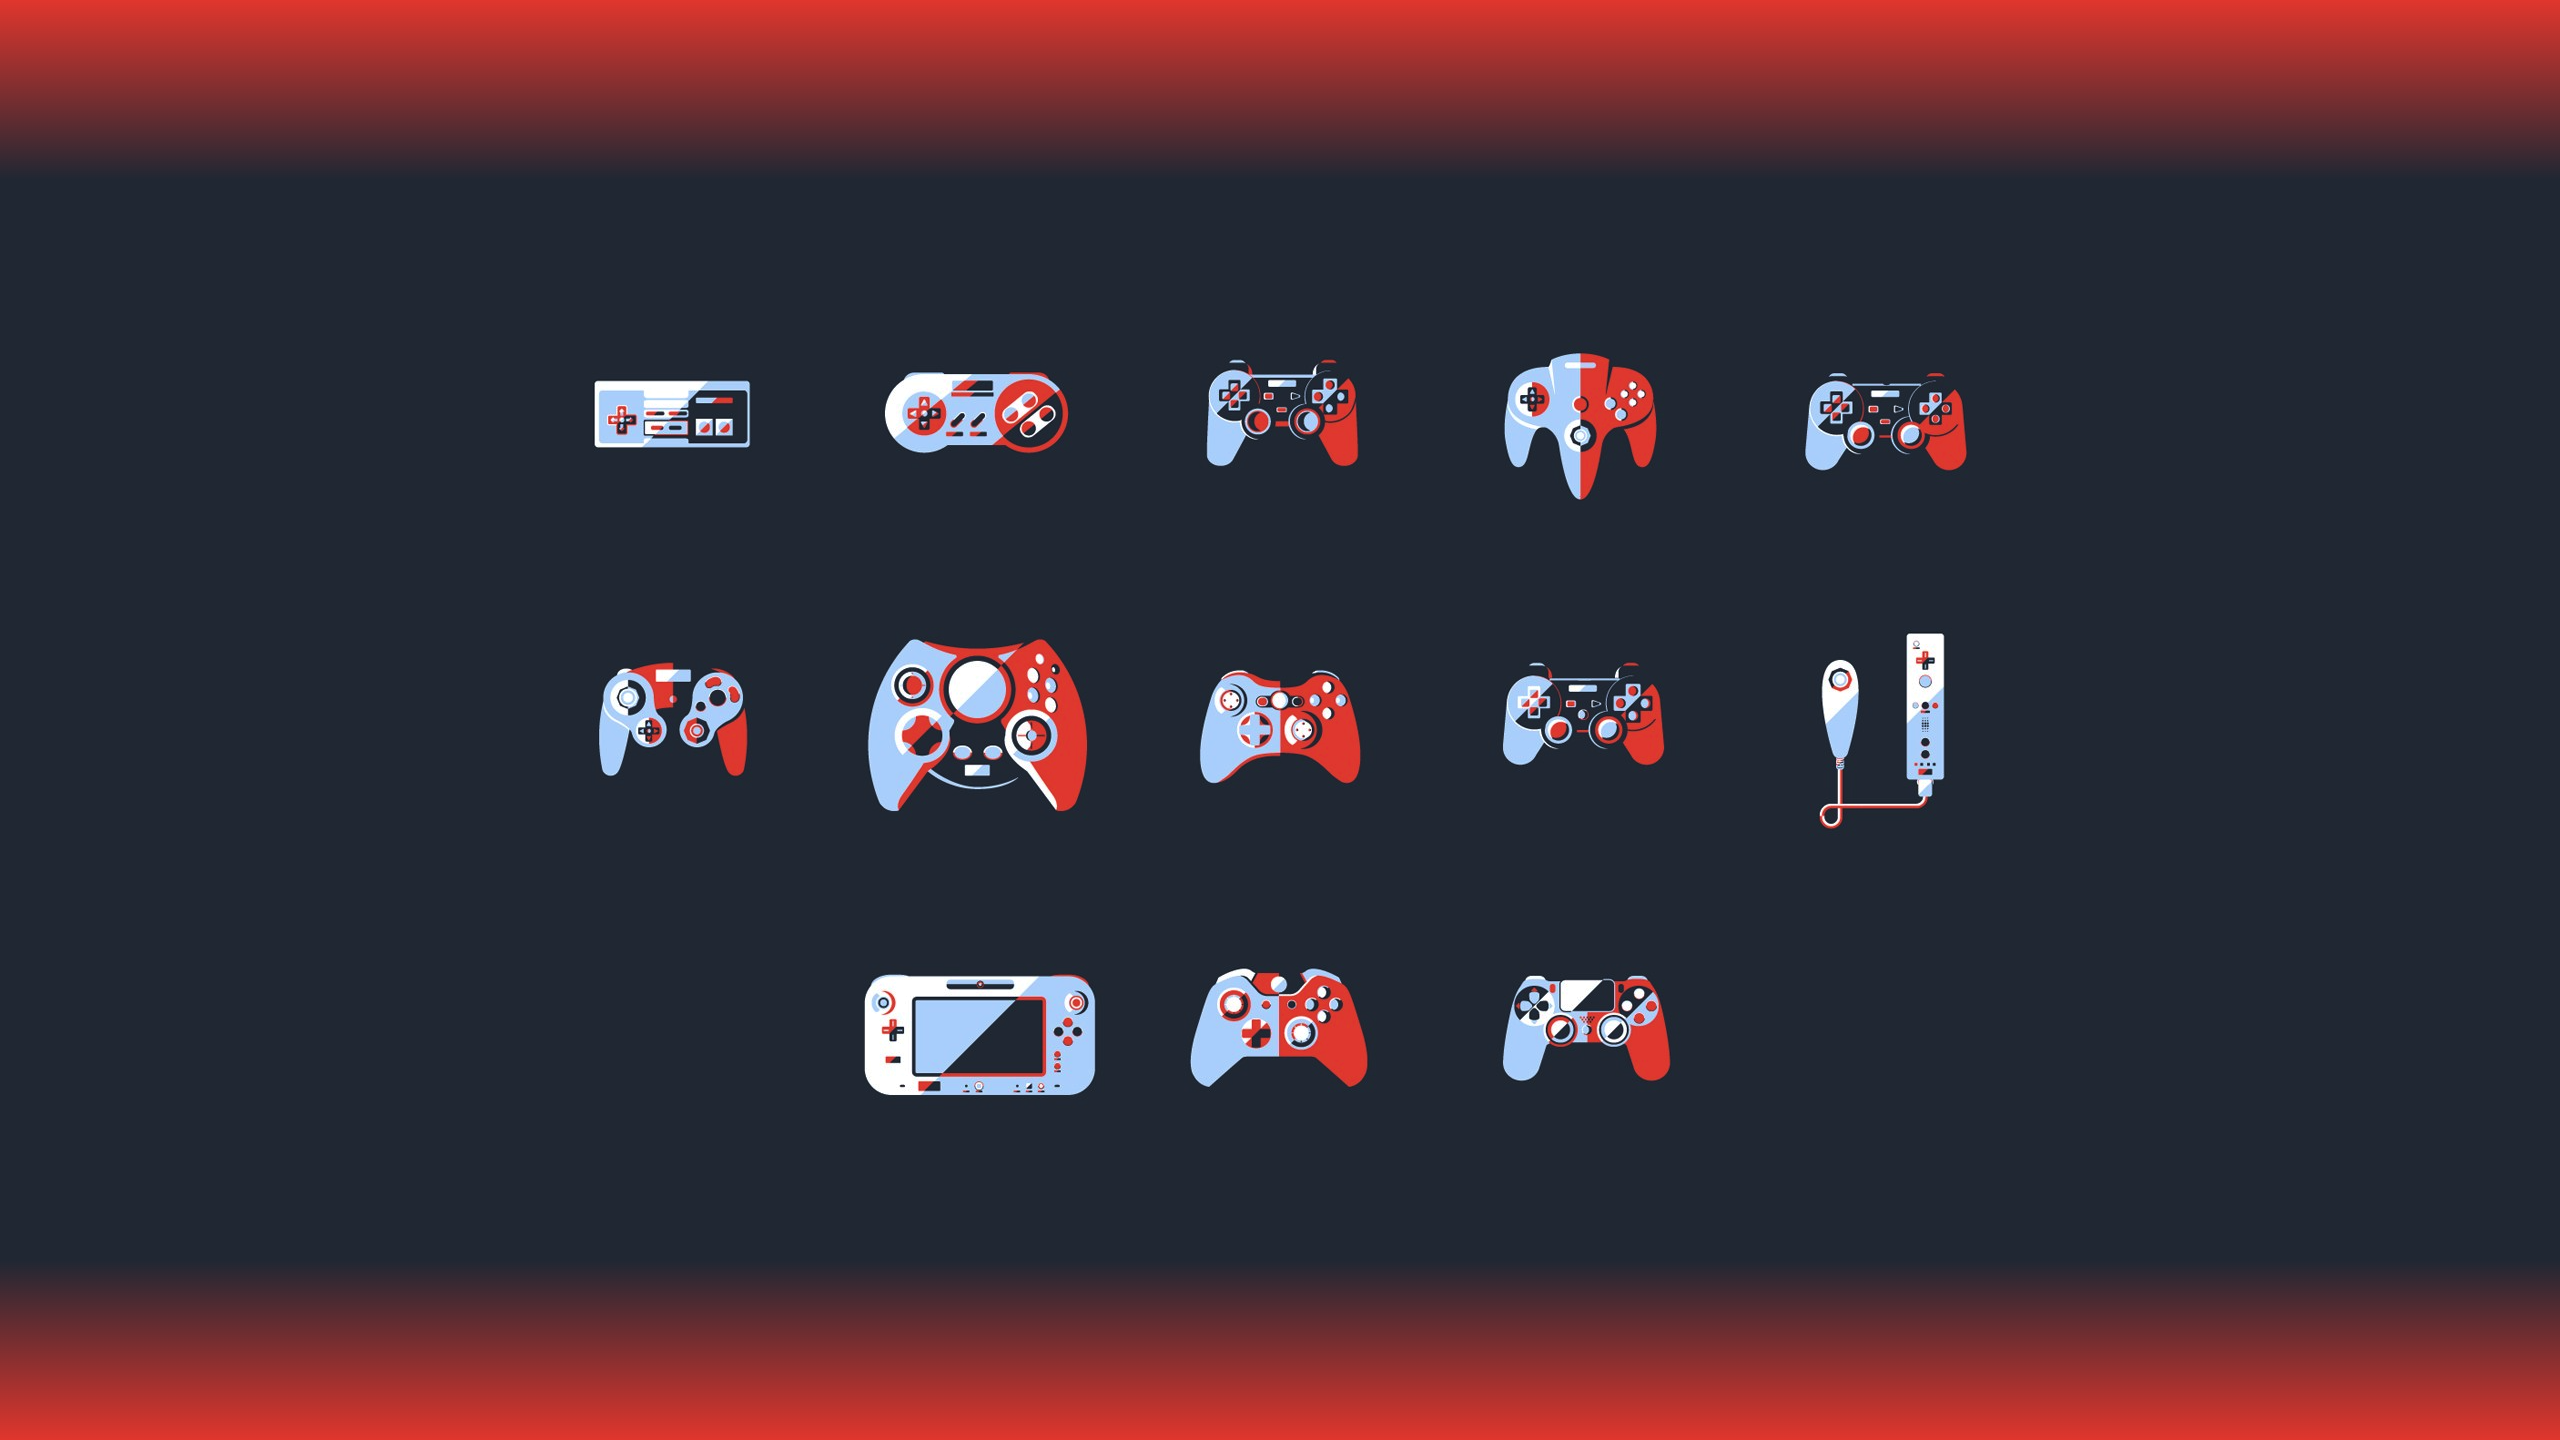 General 2560x1440 video games controllers simple background minimalism PlayStation Xbox Nintendo Entertainment System Nintendo 64 GameCube Nintendo Gamecube PlayStation 2 Xbox 360 PlayStation 3 Wii Wii U Xbox One PlayStation 4